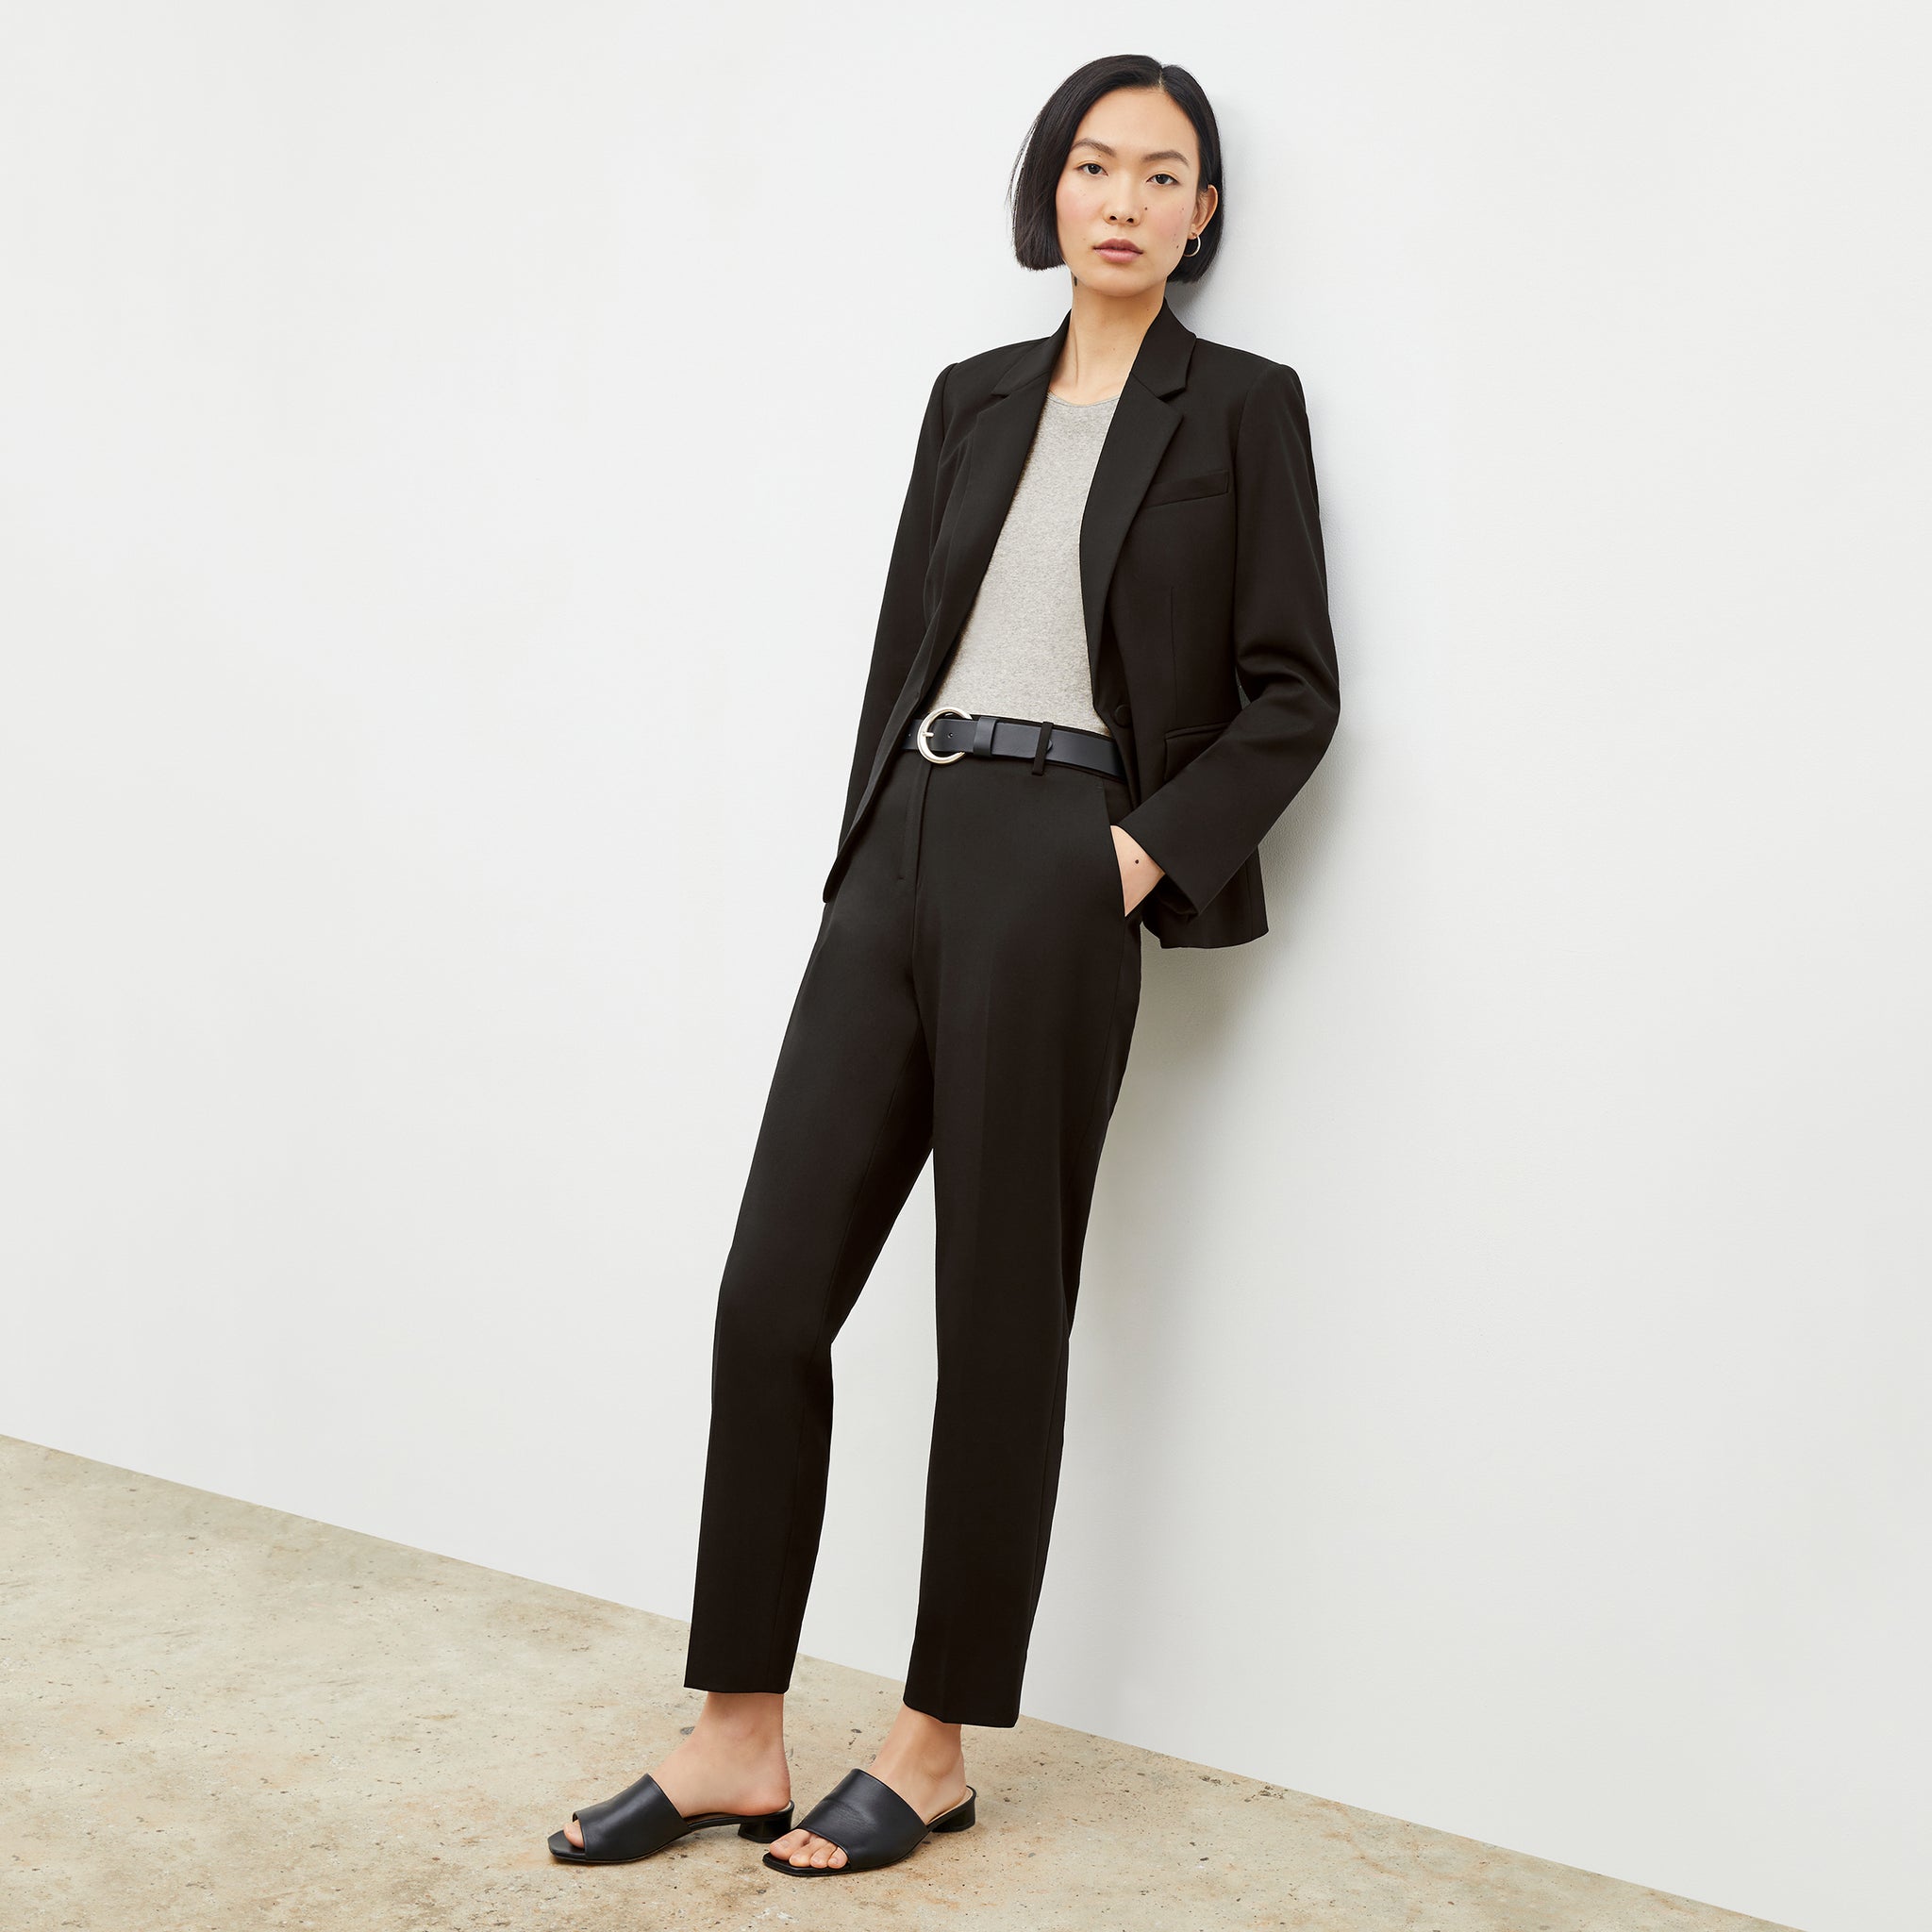 Front image of a woman standing wearing the Mejia pant in black